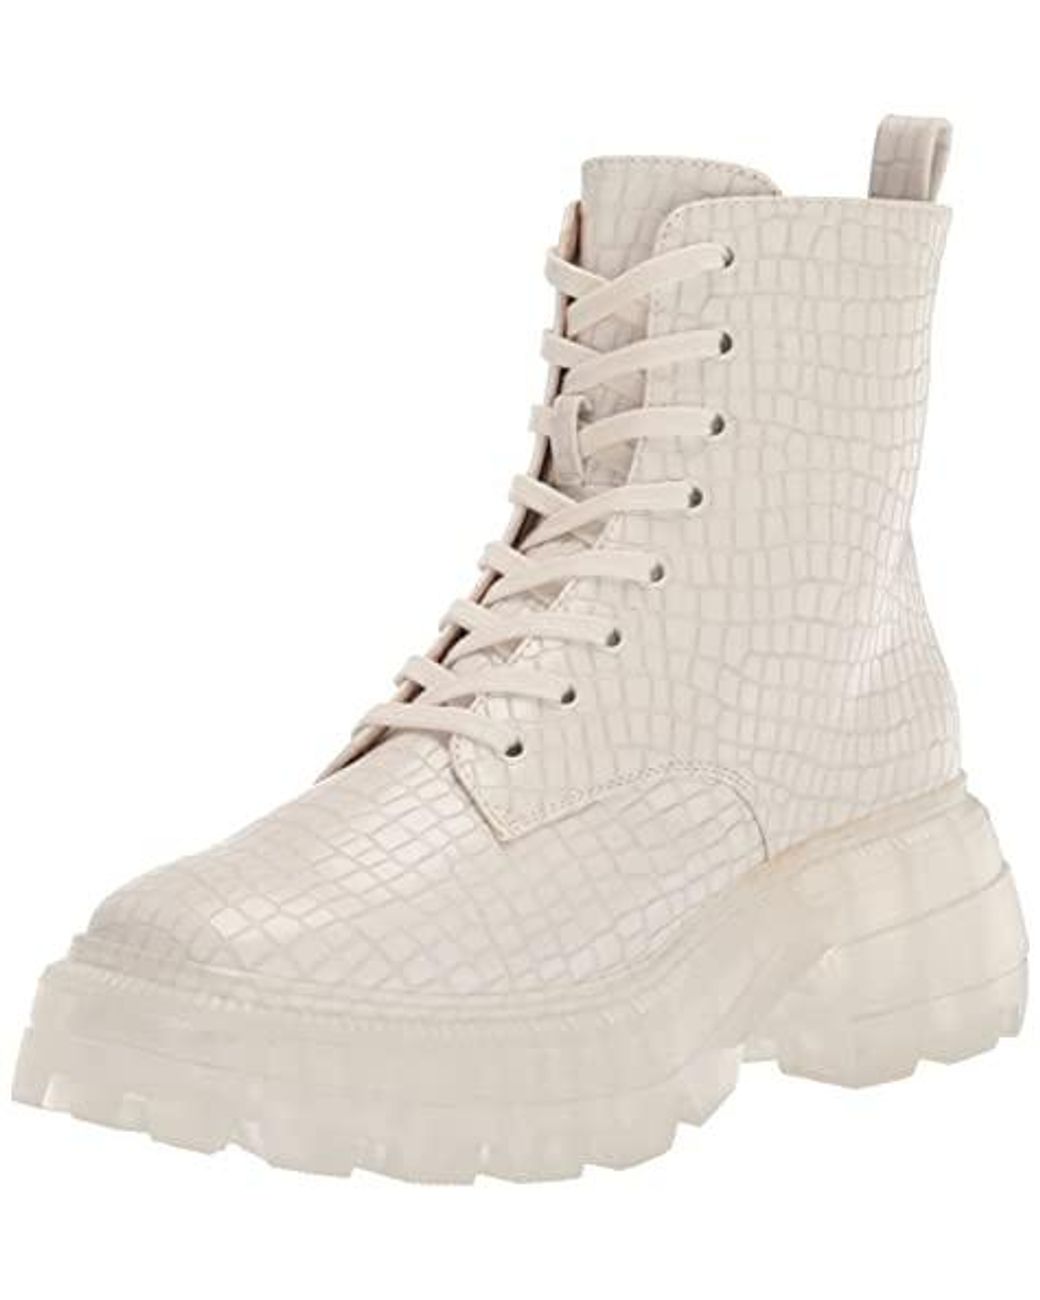 Katy Perry The Geli Combat Boot in Natural | Lyst